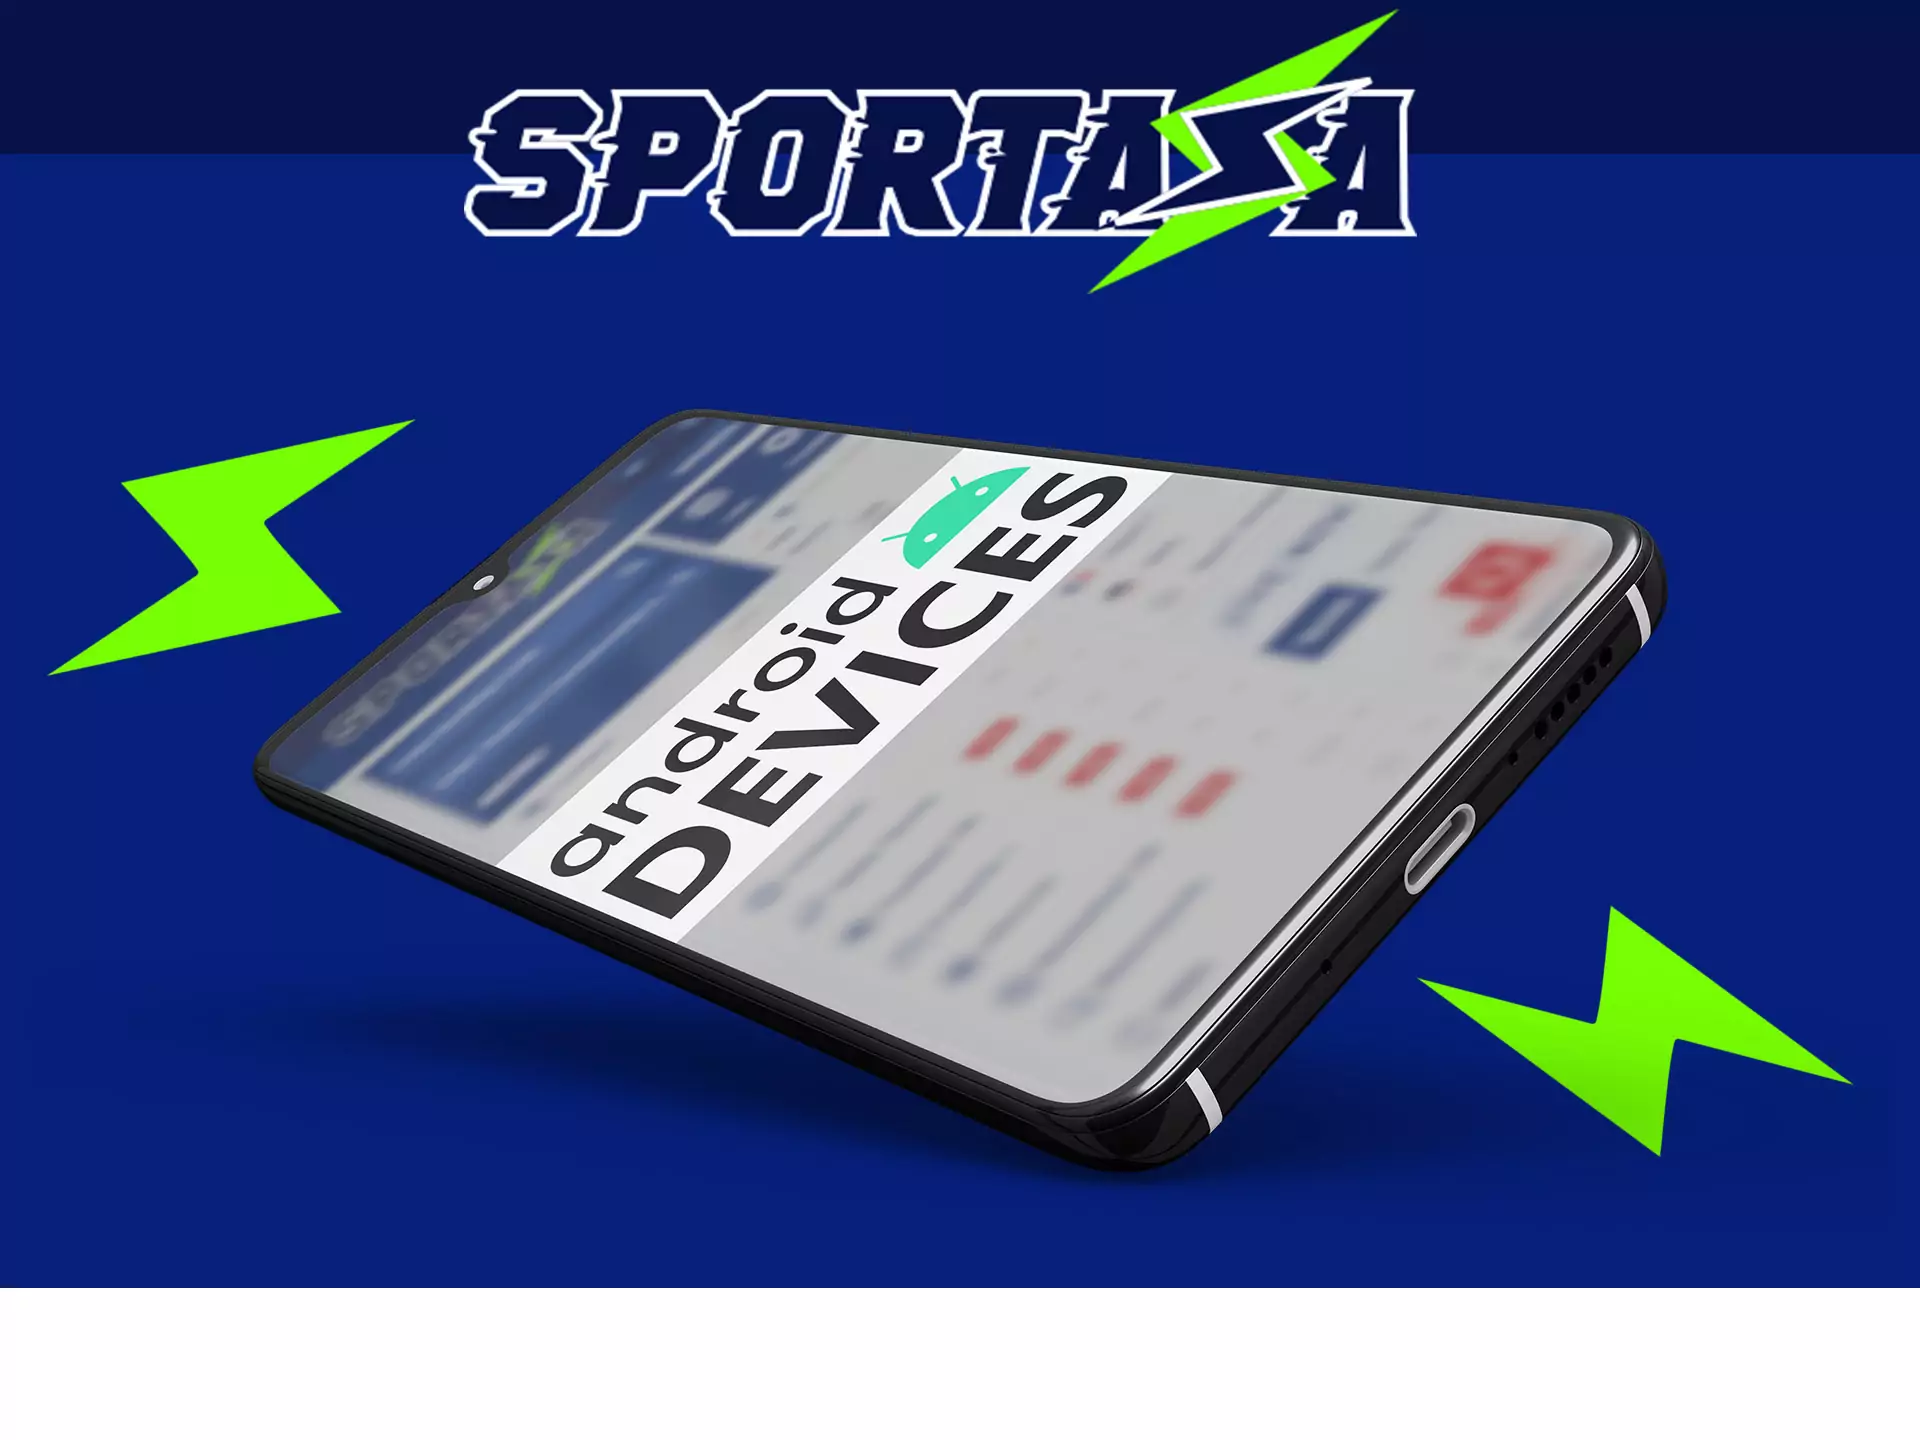 Sportaza app available at most of Android devices.